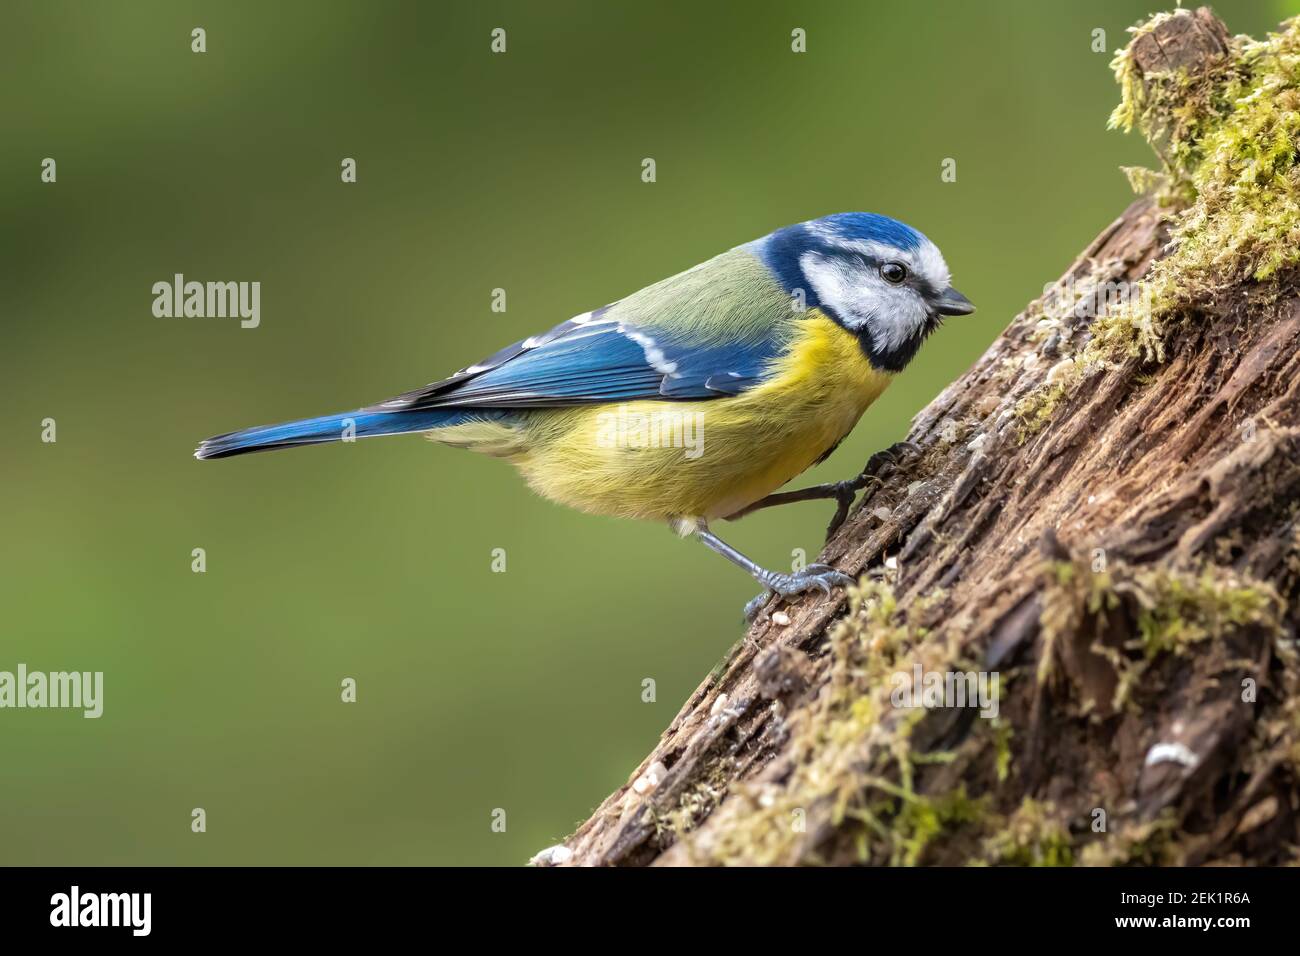 Blue tit at a feeding place at the Mönchbruch pond in a natural reserve in Hesse Germany. Looking for food in winter time. Stock Photo